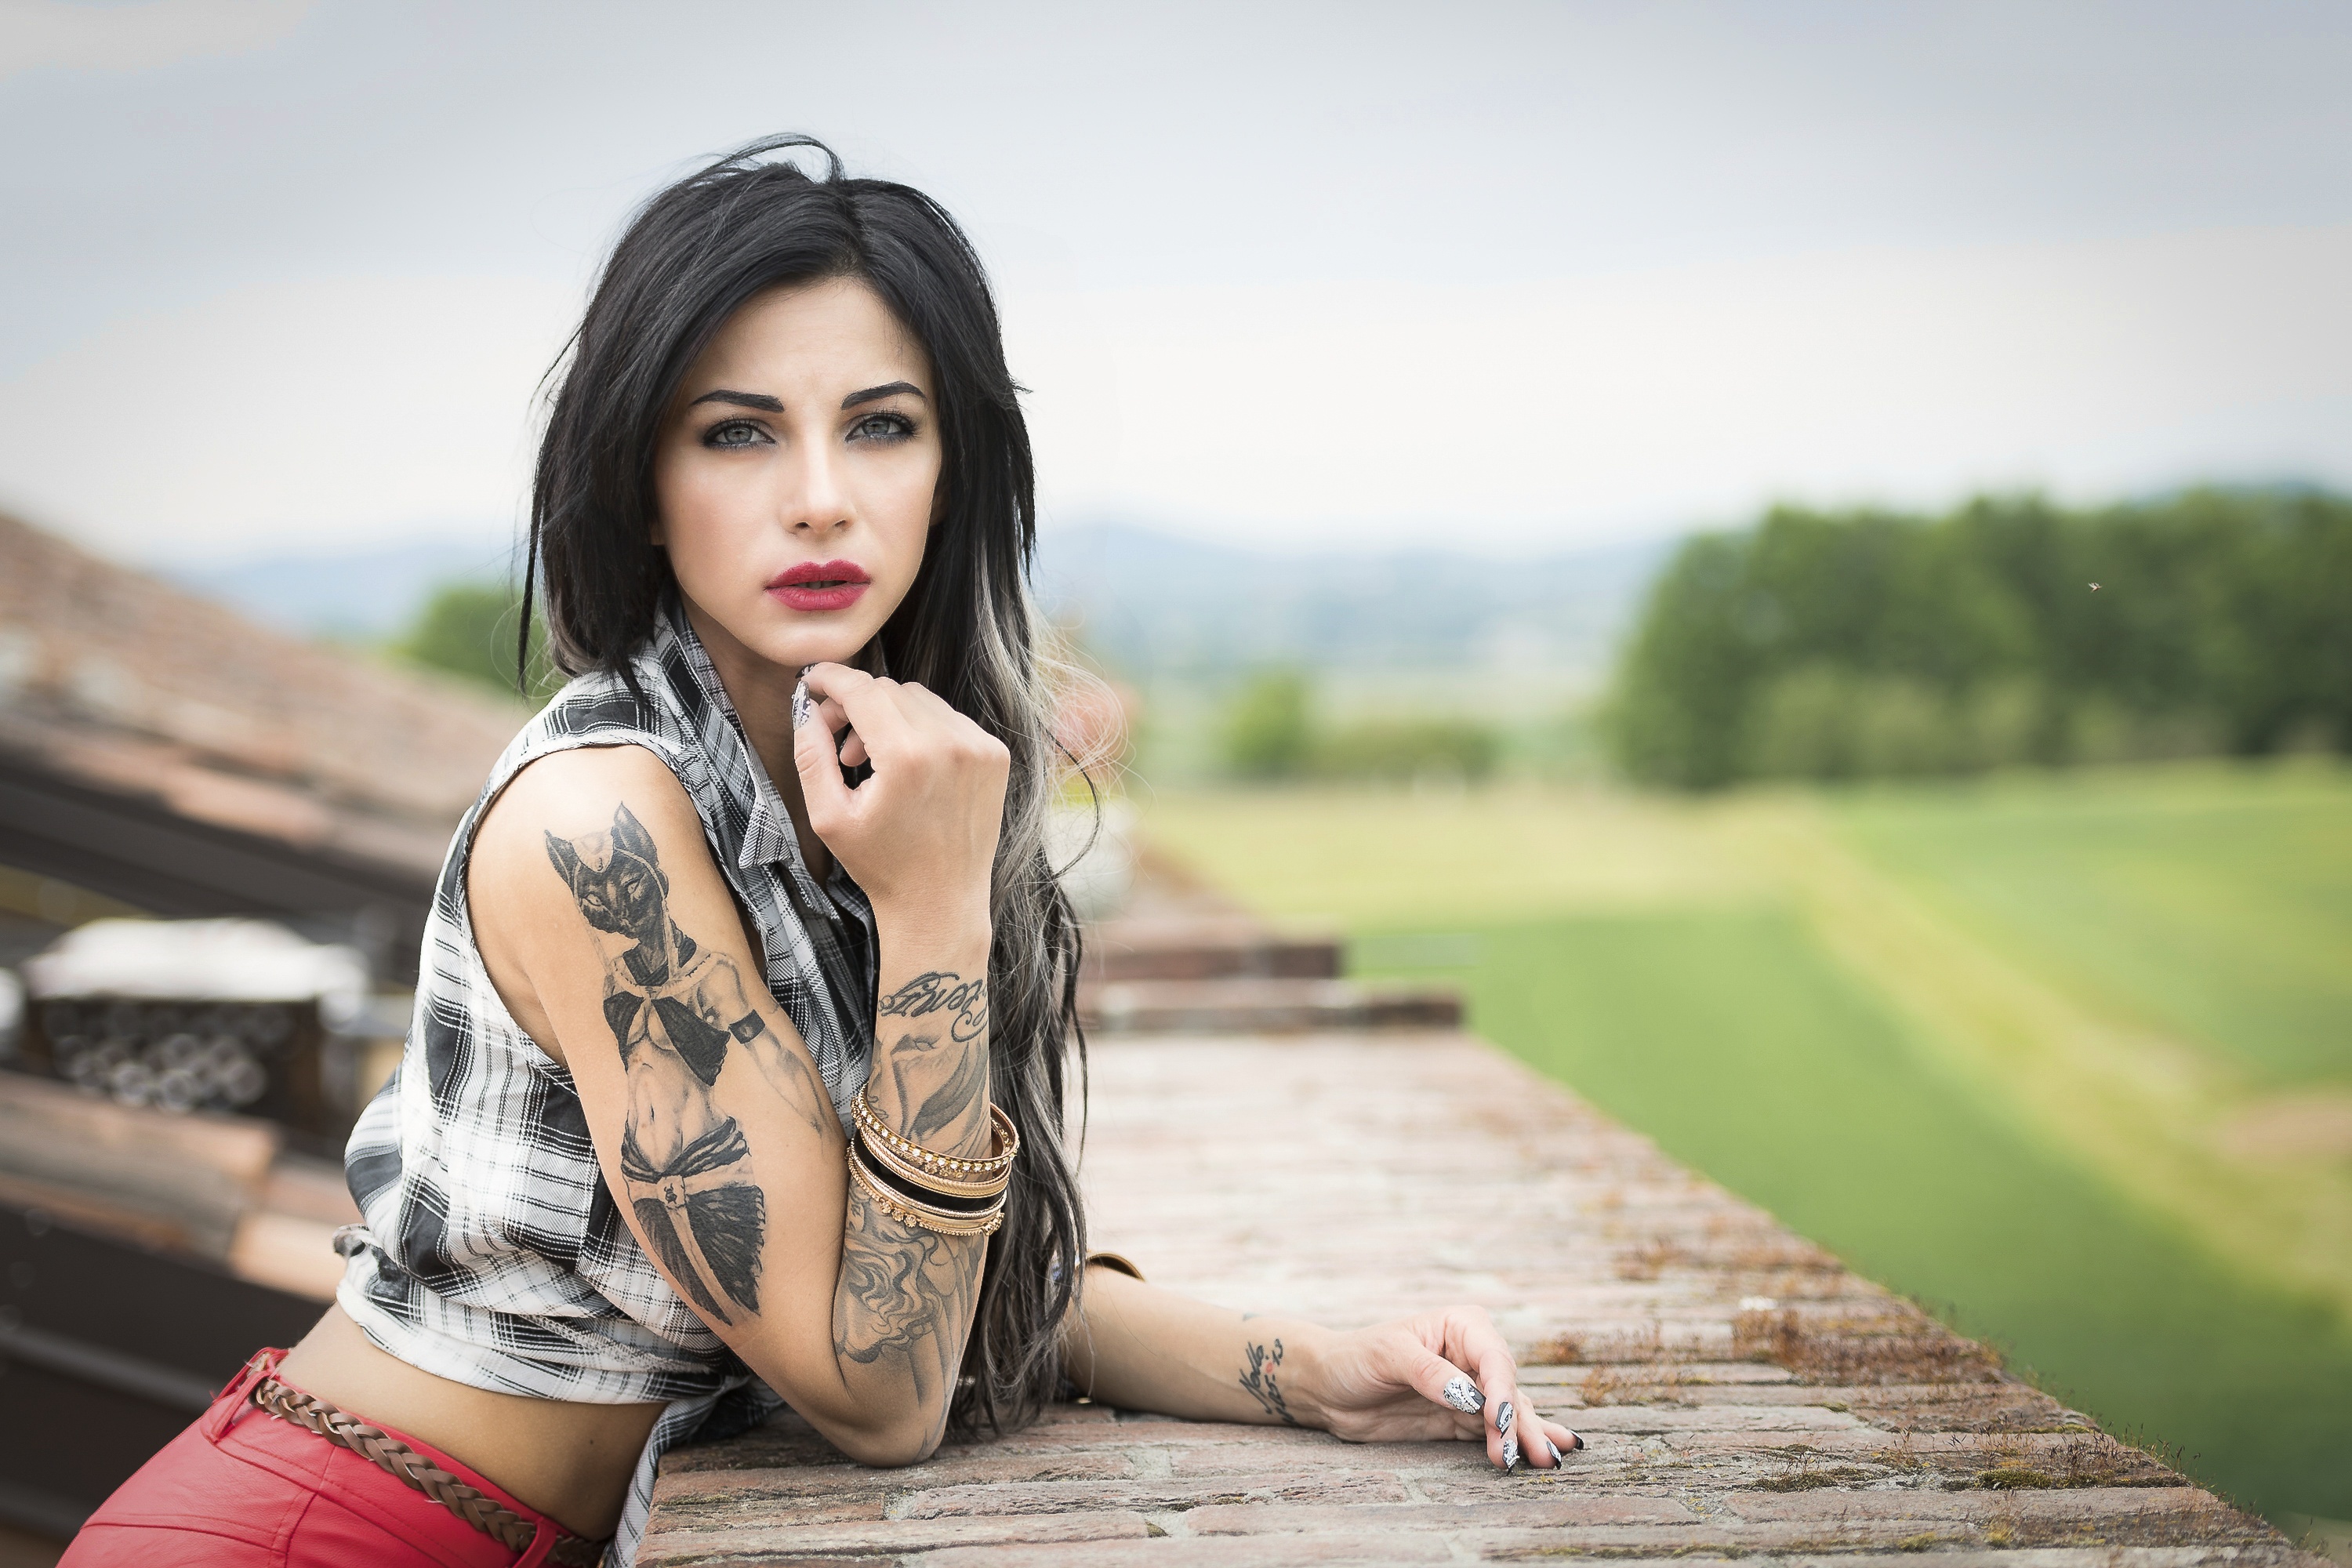 Pictures Swords Tattoos The Lost Warrior Alessandro Di Cicco Girls